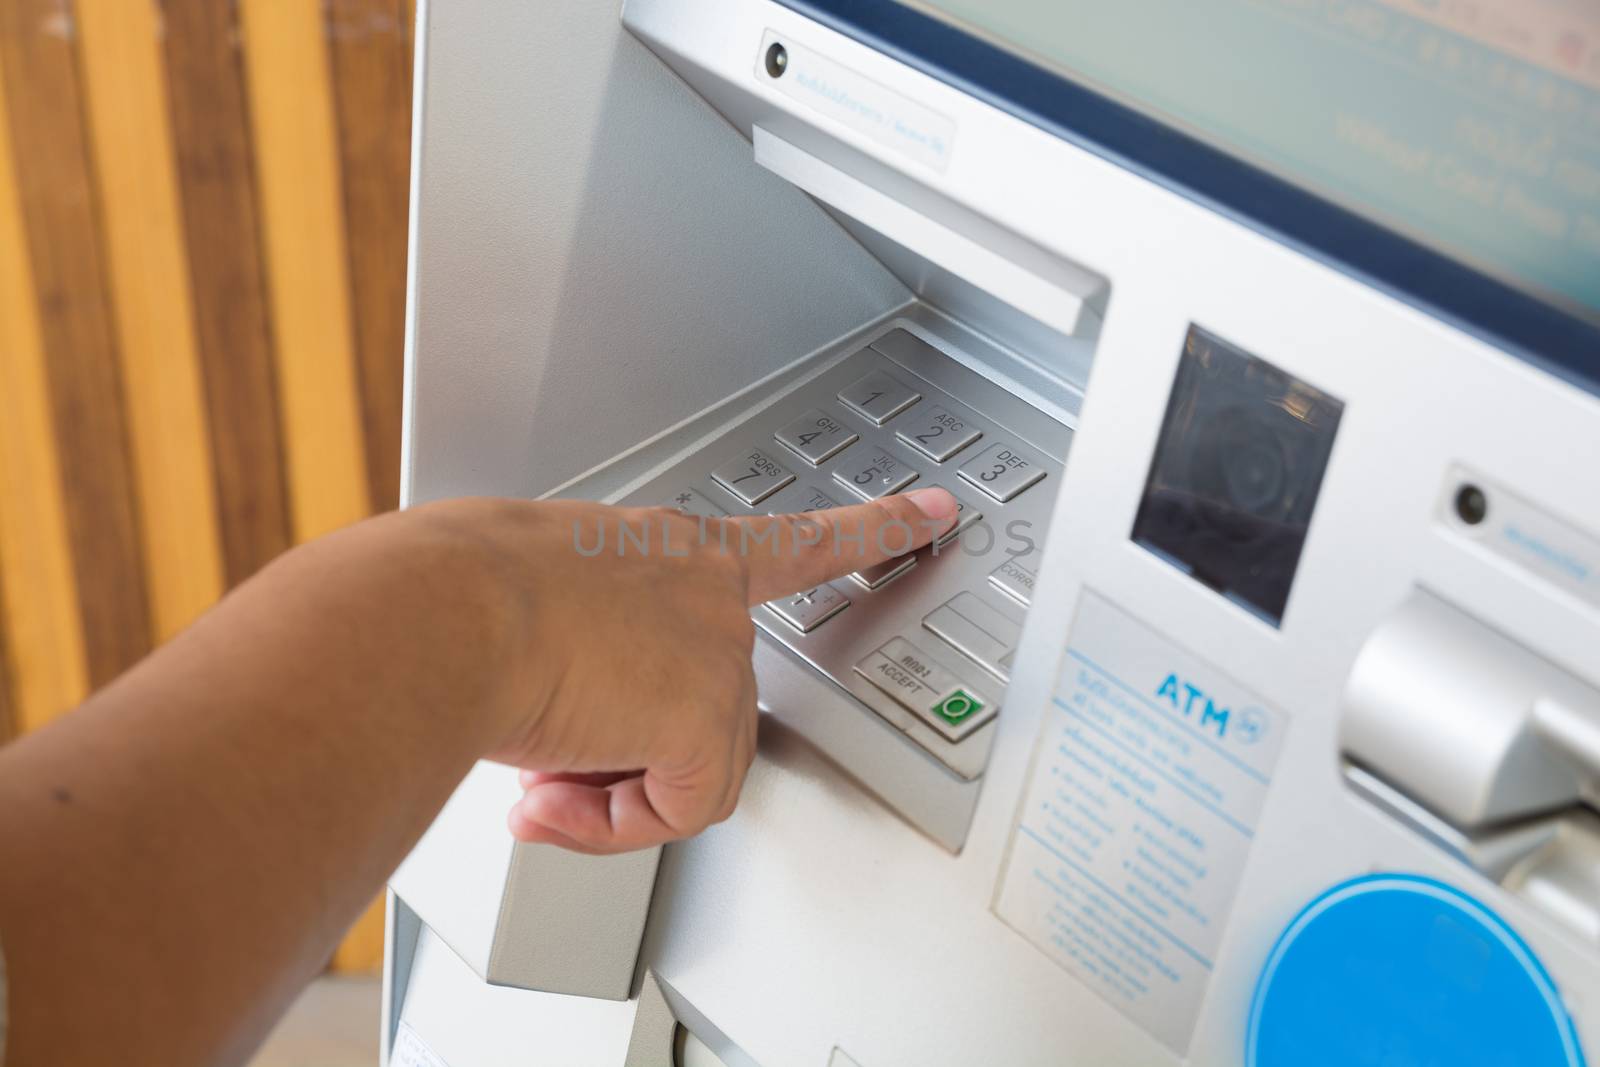 Keyboard Panel of ATM or Autmatic Teller Machine with Female Han by thampapon